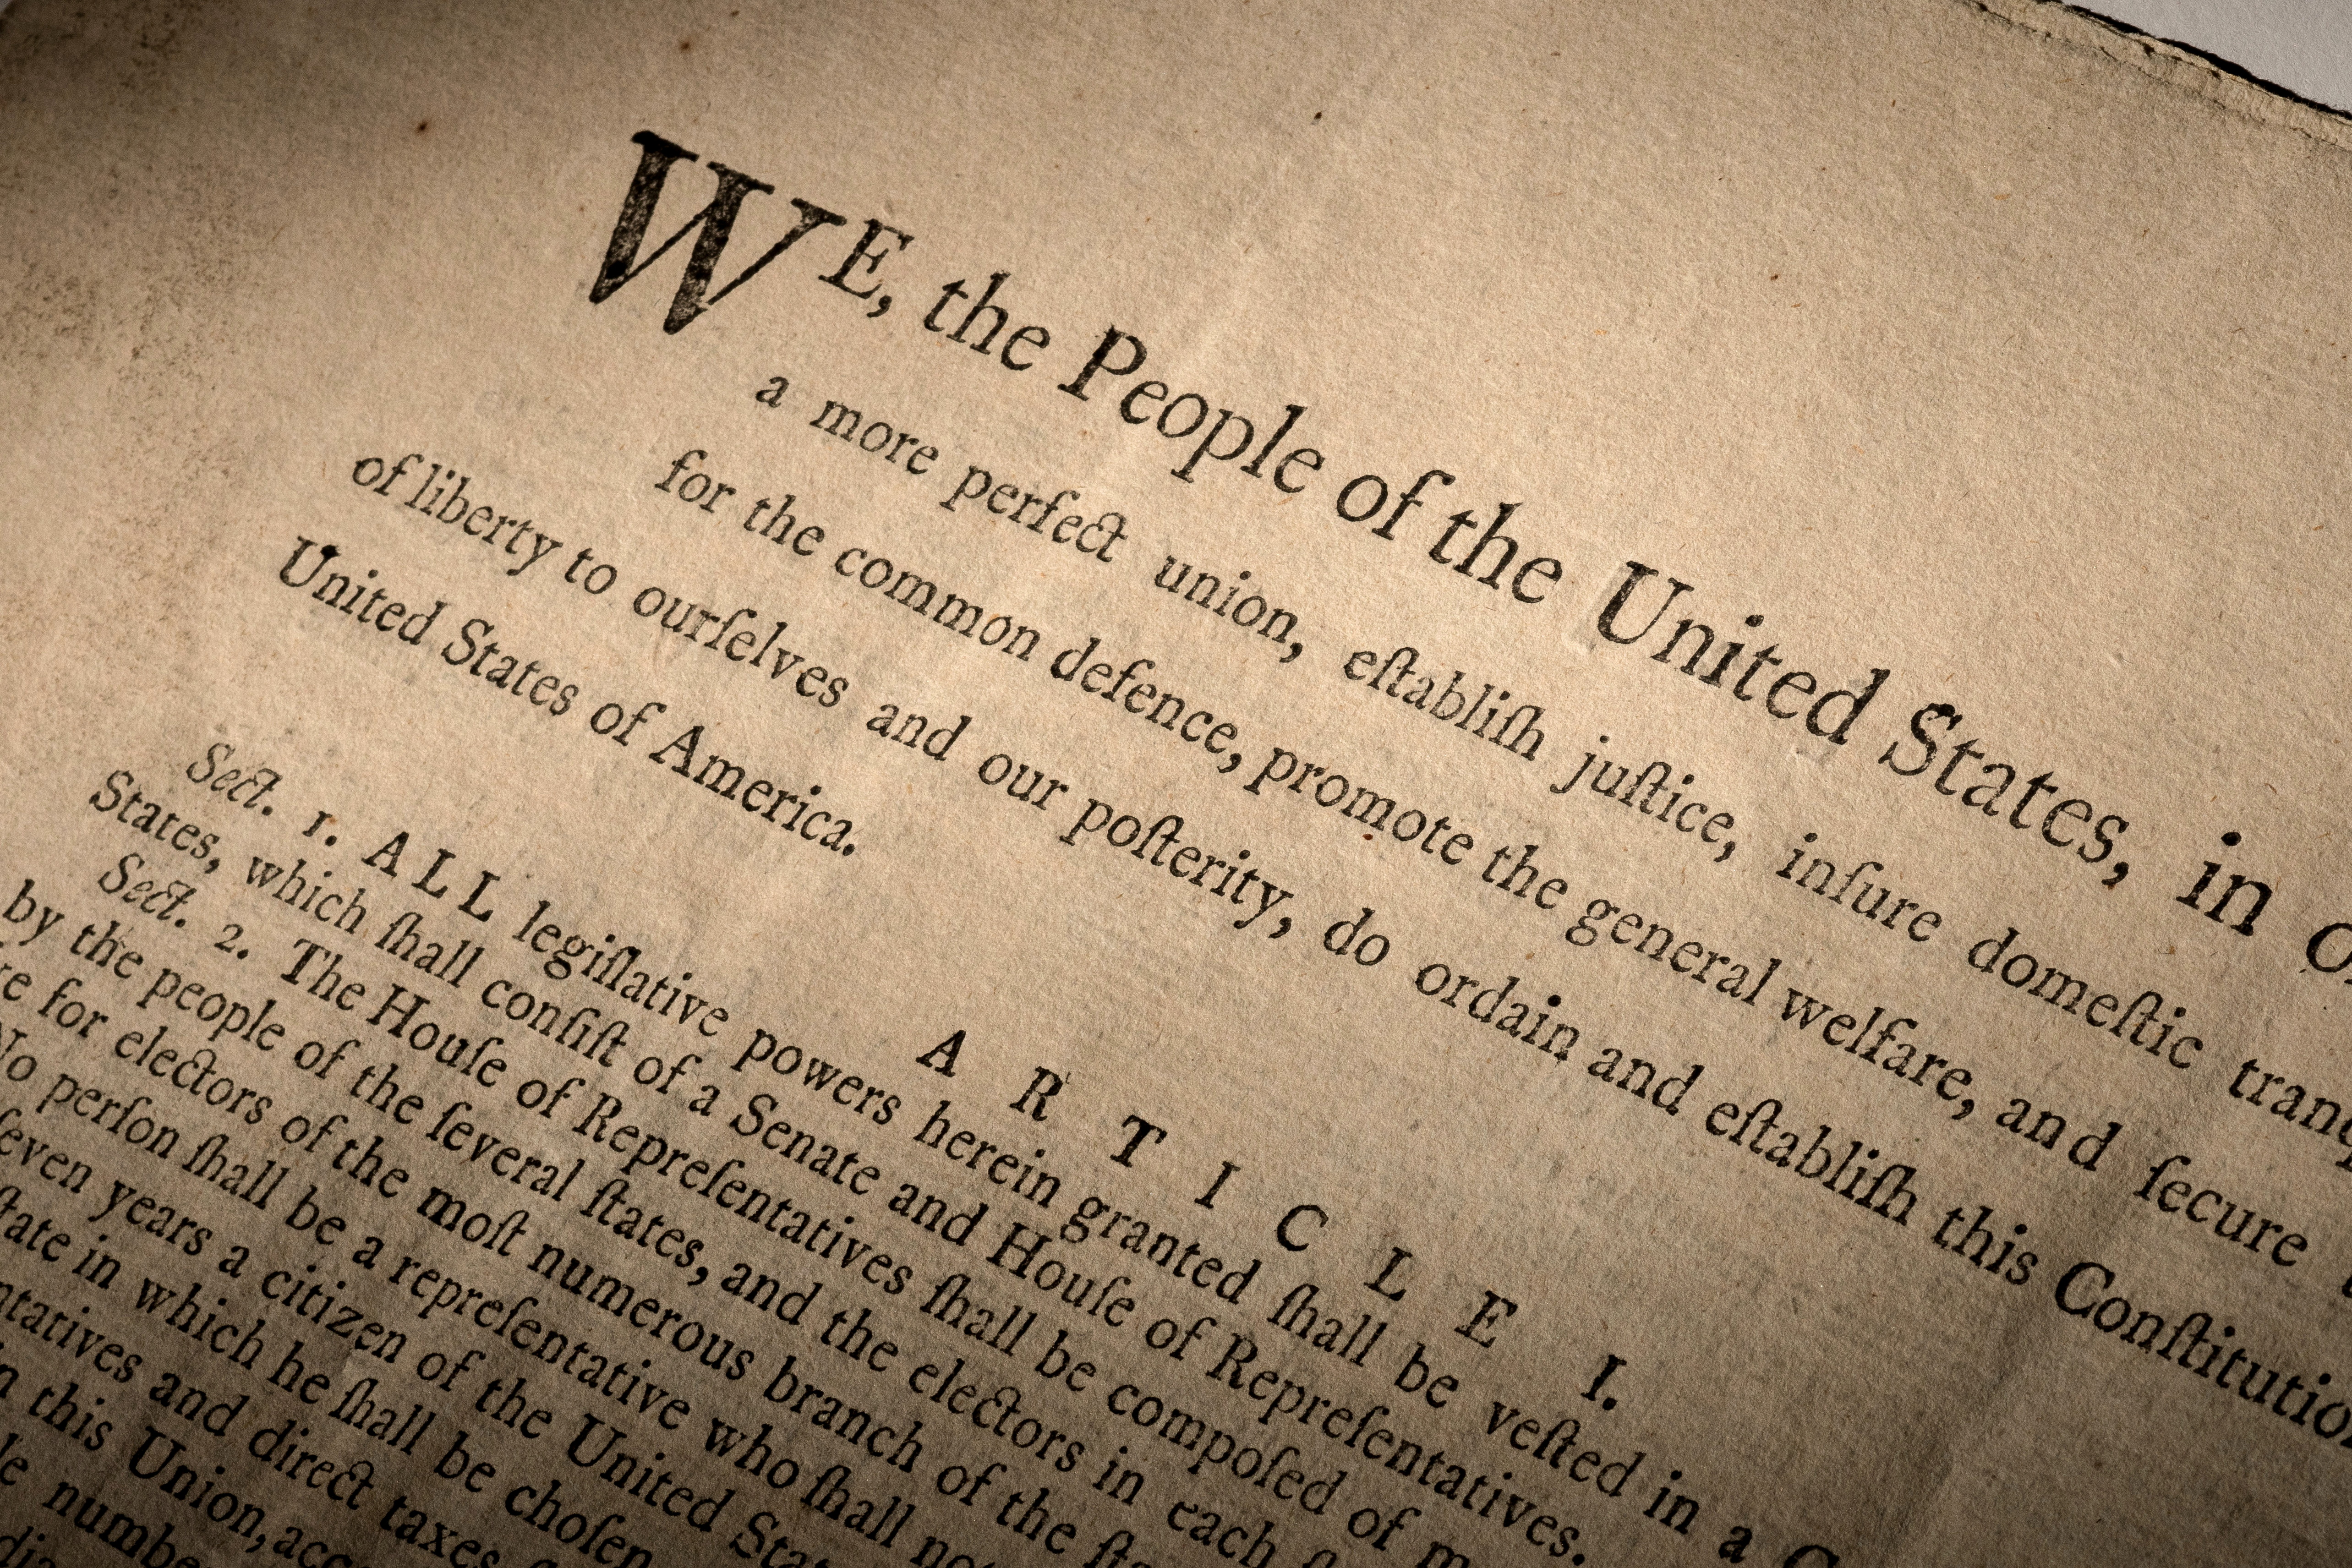 U.S. Constitution auction in New York